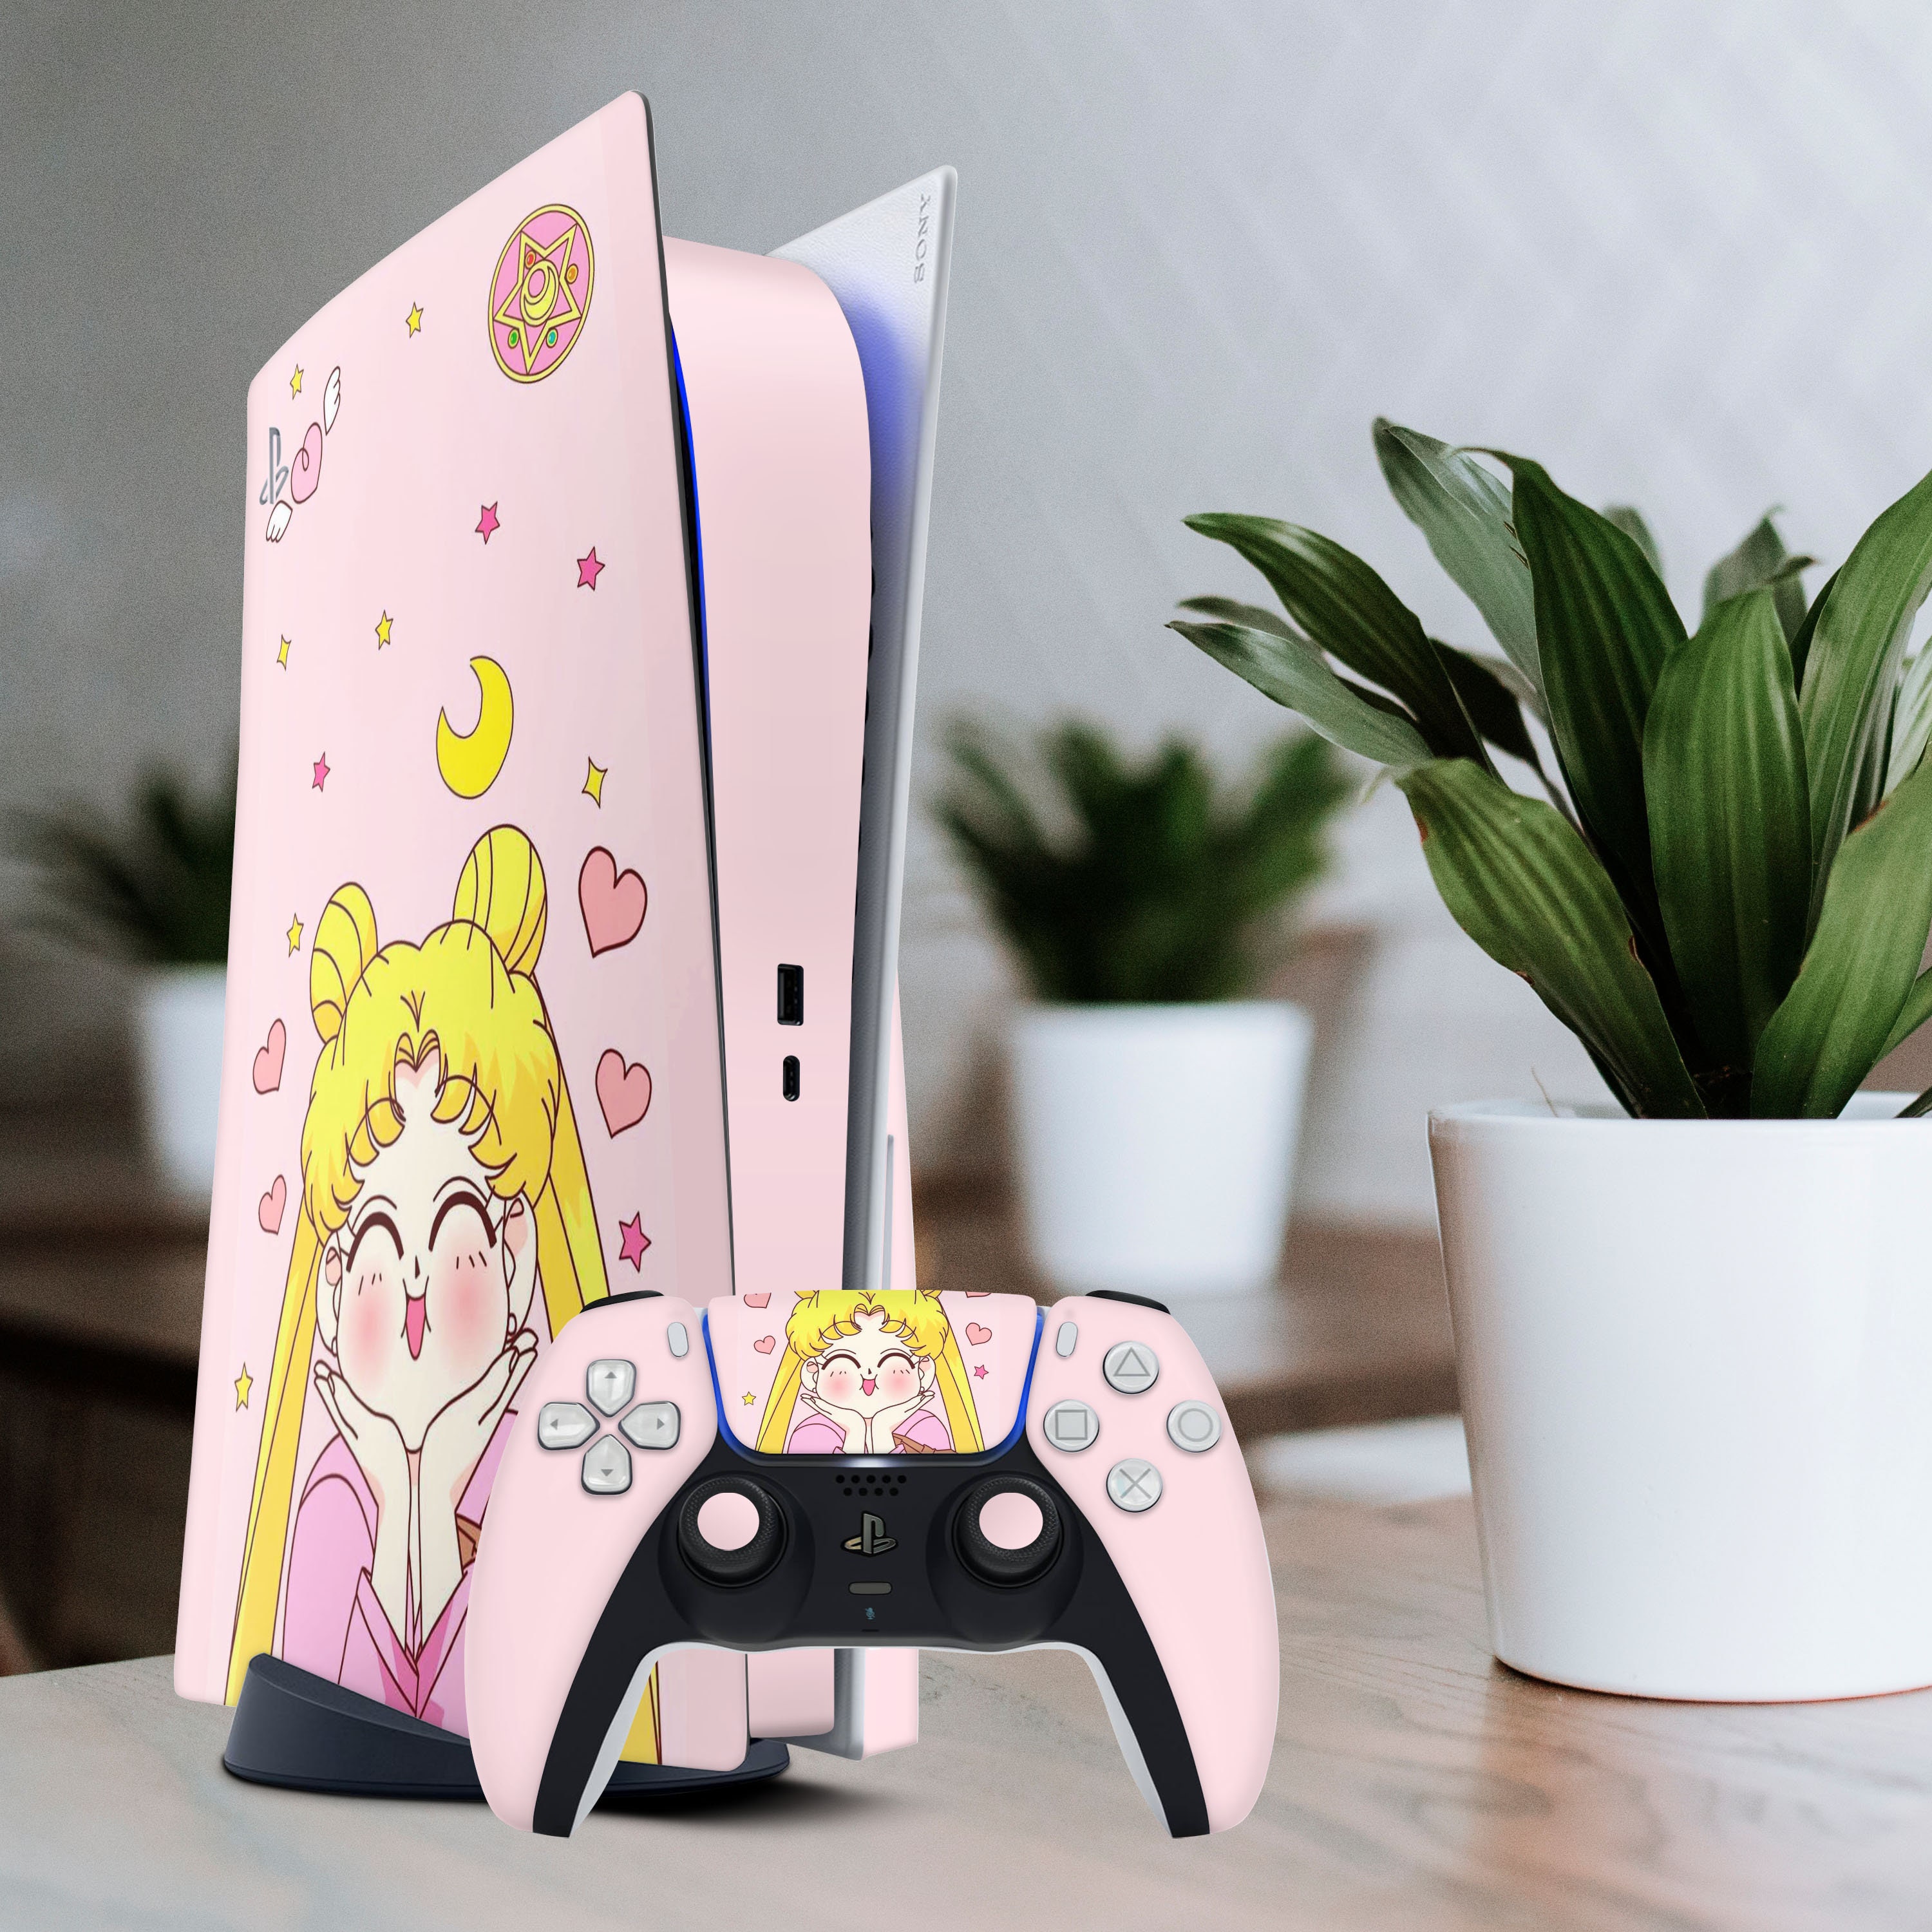 Custom Painted Play Station 5 for TWITCH Streamer🎮☀️ - EPIC PS5 !!! 